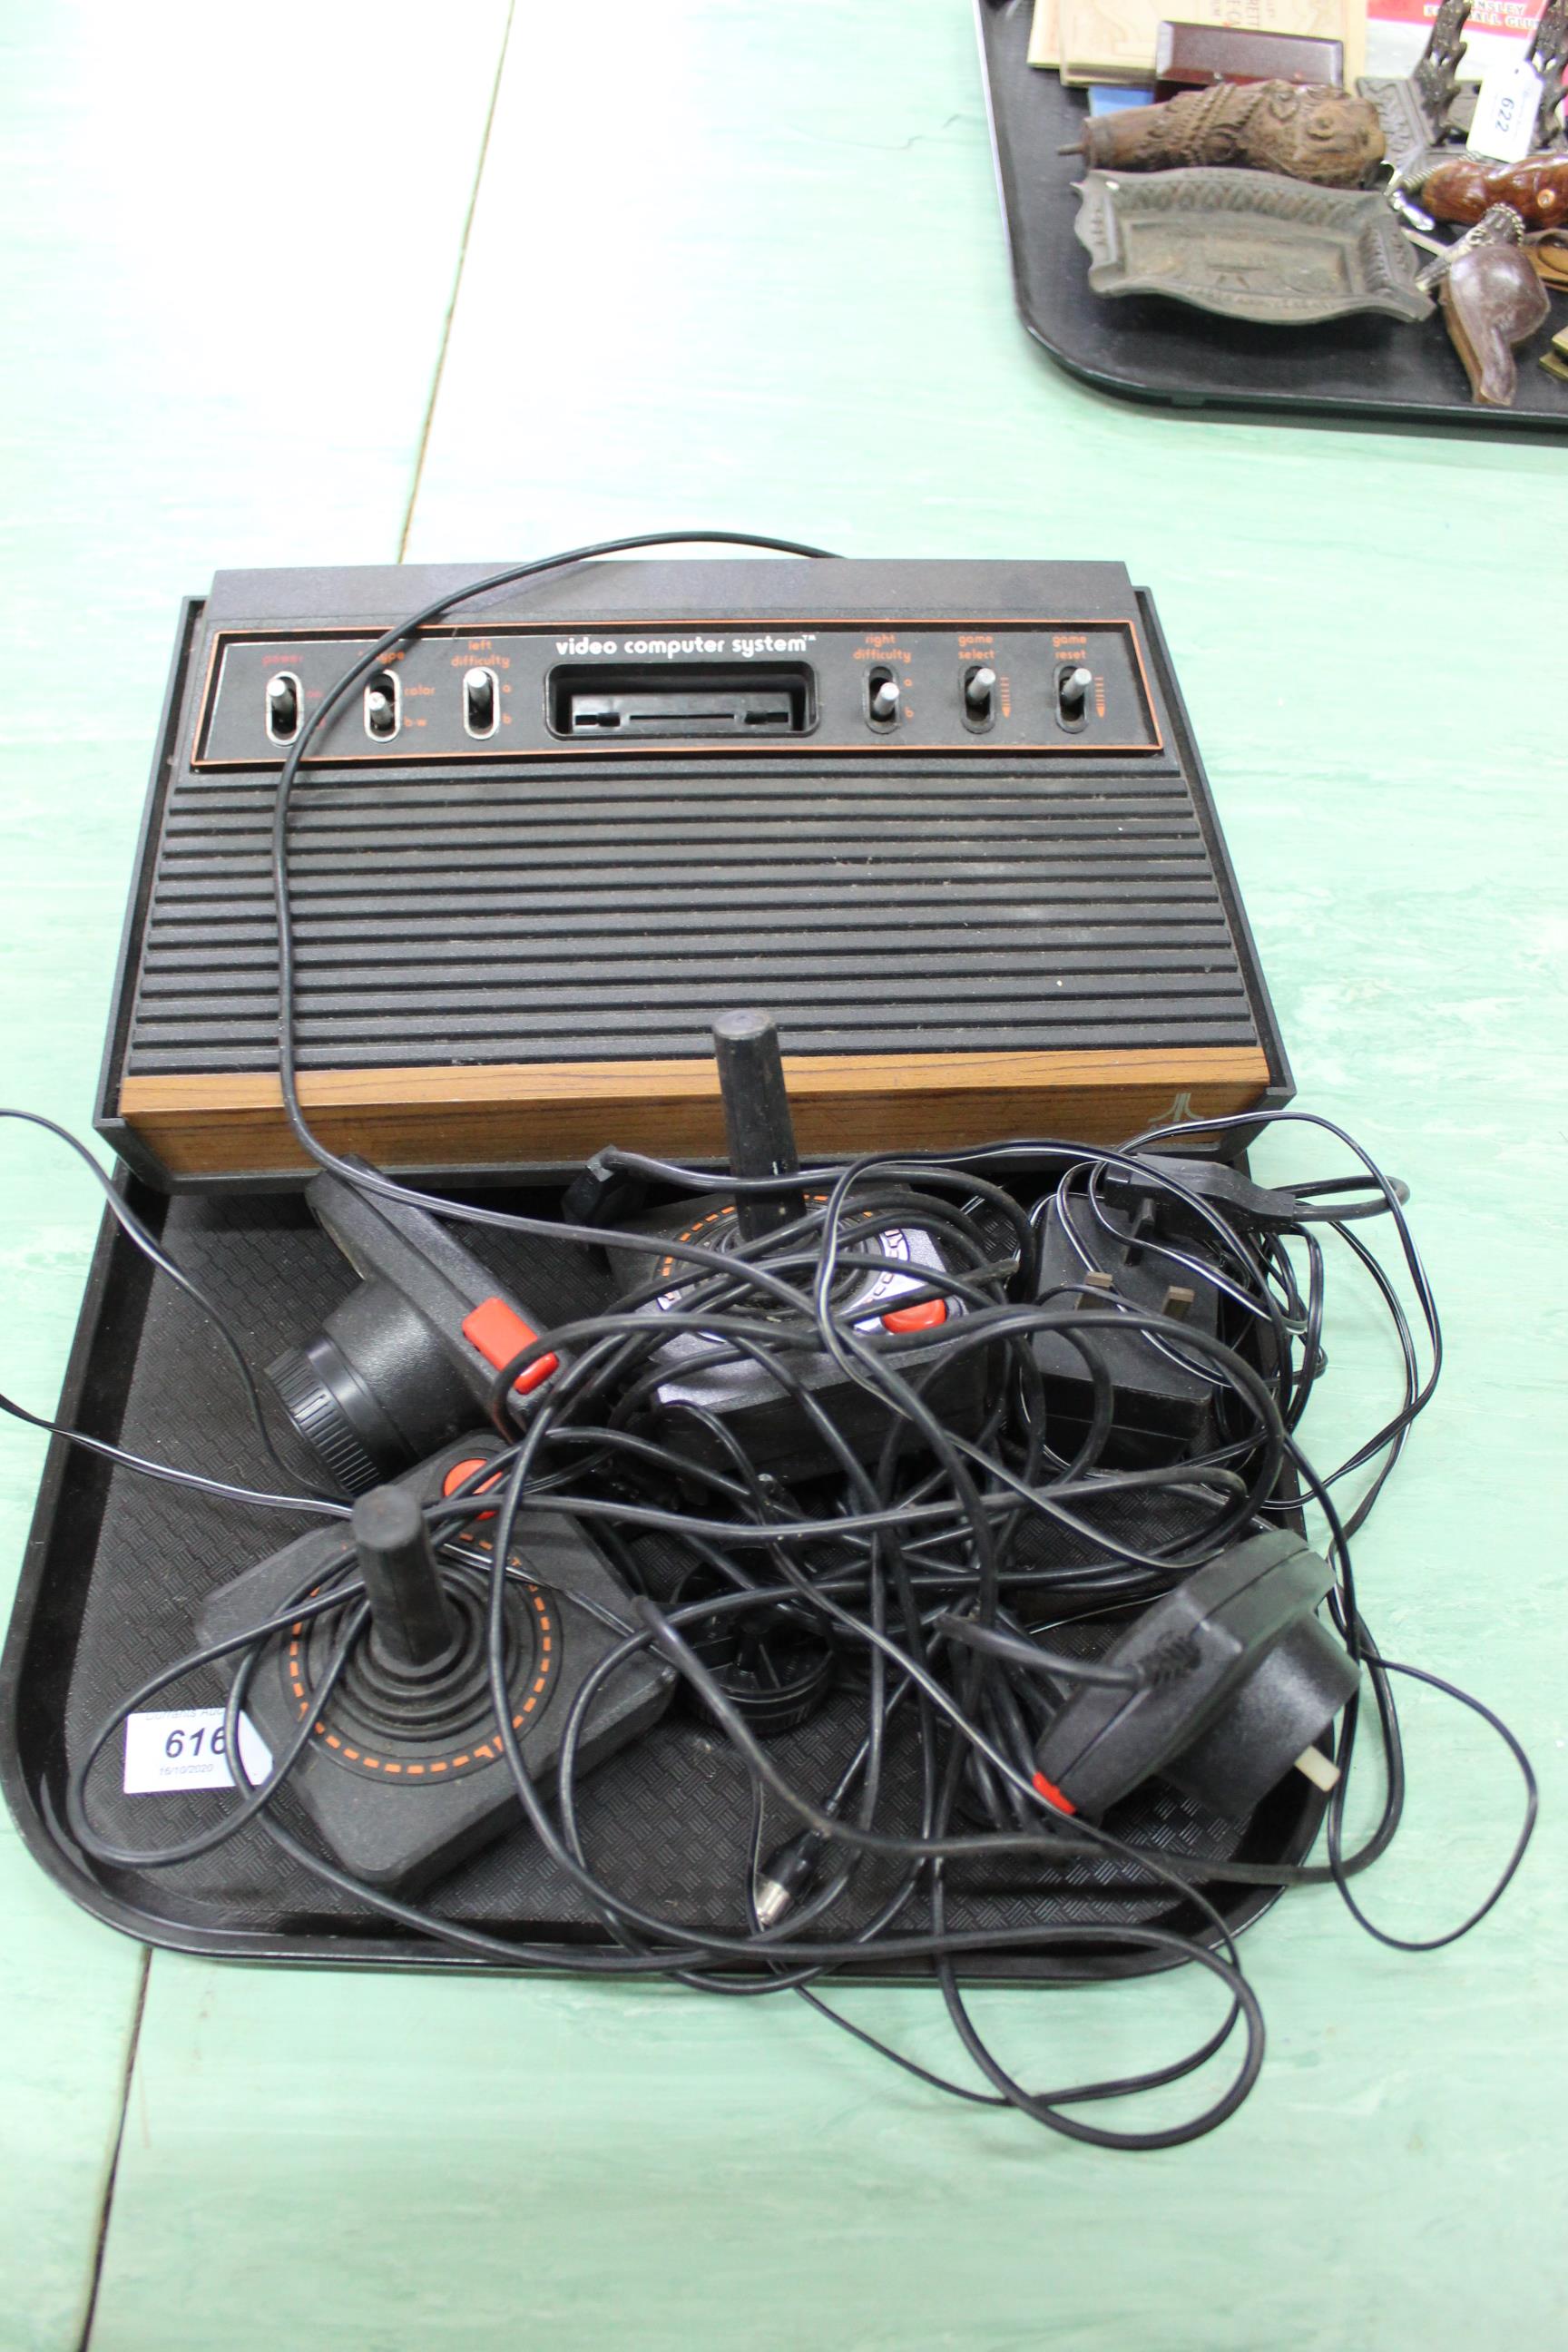 A vintage Atari CX-2600 video computer system with controllers